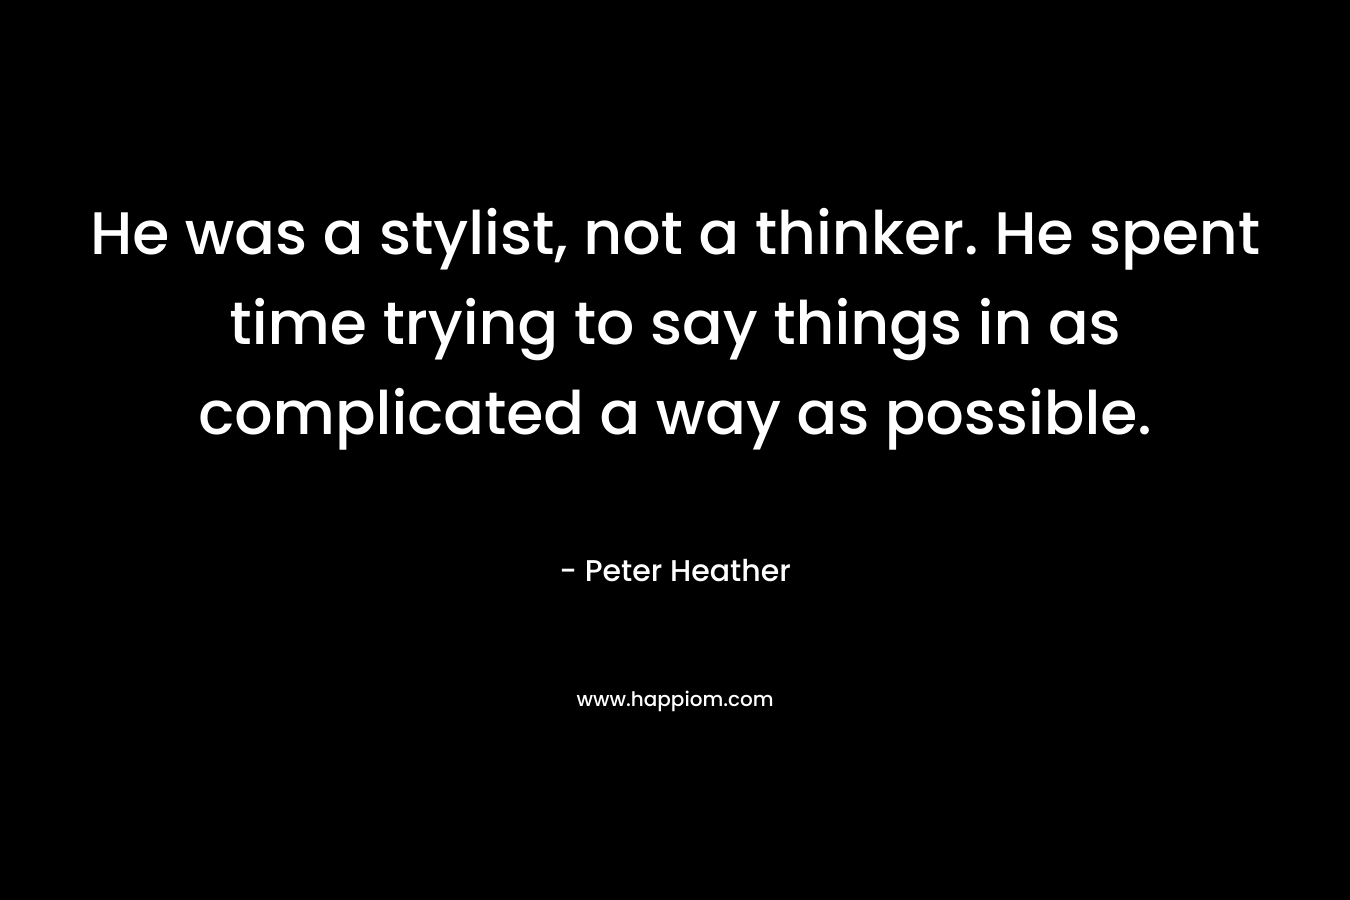 He was a stylist, not a thinker. He spent time trying to say things in as complicated a way as possible. – Peter Heather